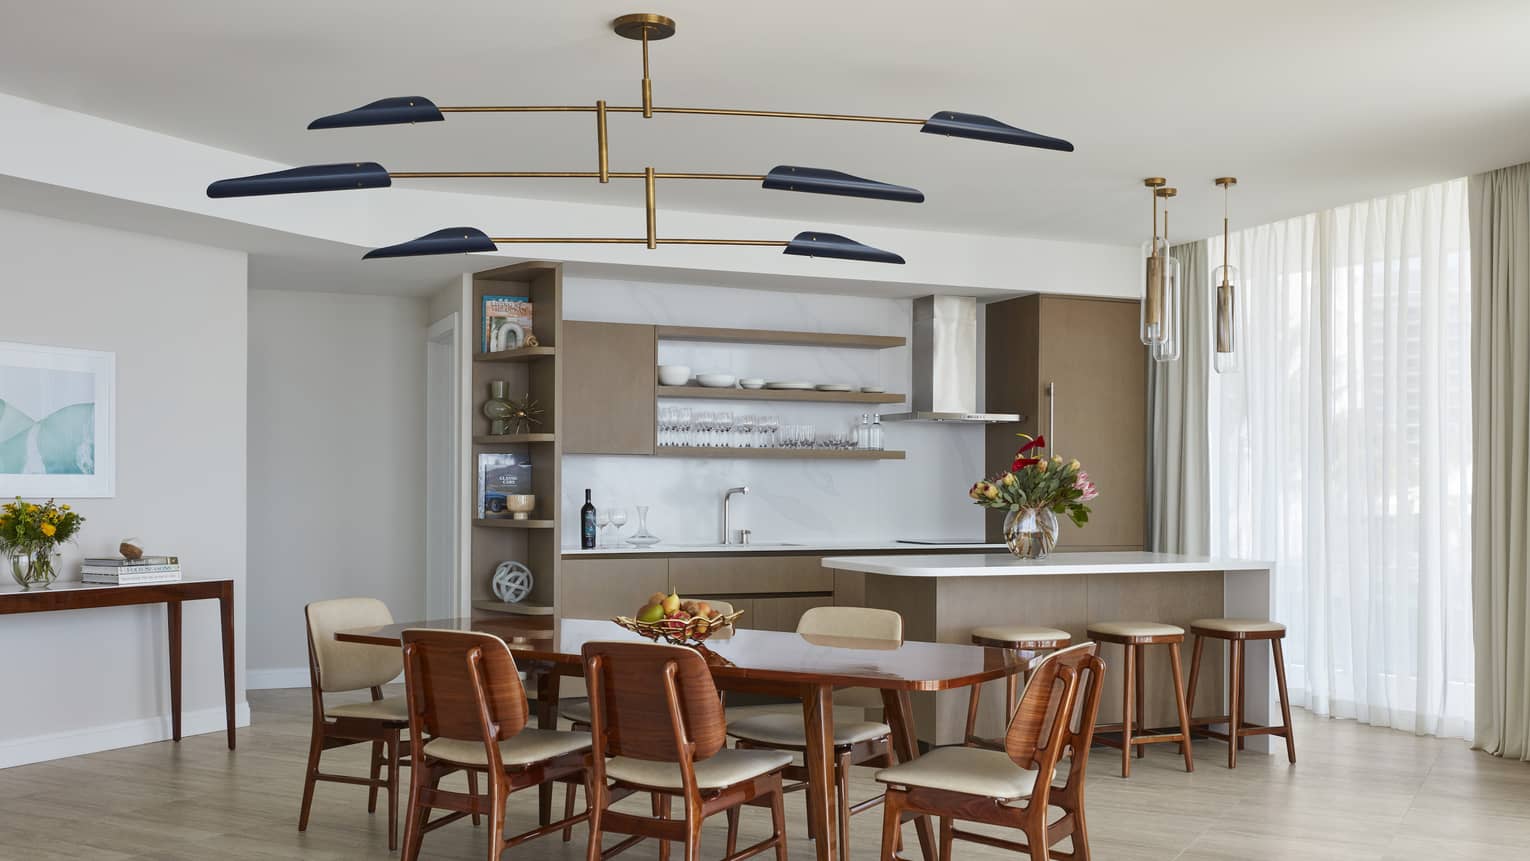 Kitchen and dining table with modern lighting fixture